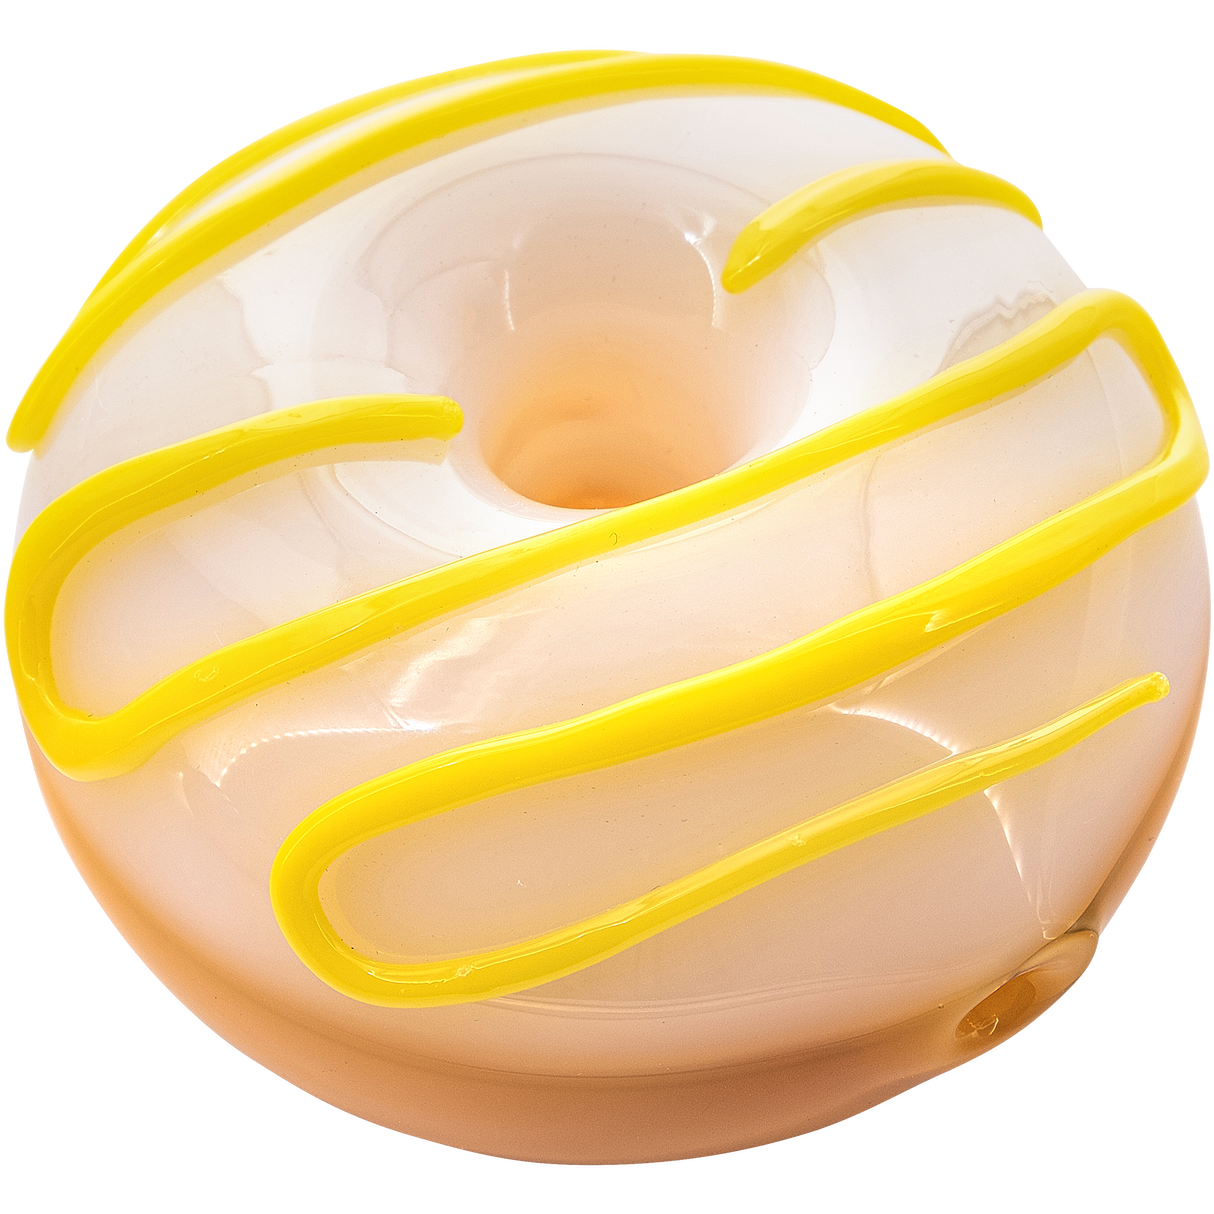 LA Pipes "Frosted Donut" Glass Pipe in Lemon Frosting - Compact 3.85" Spoon Design